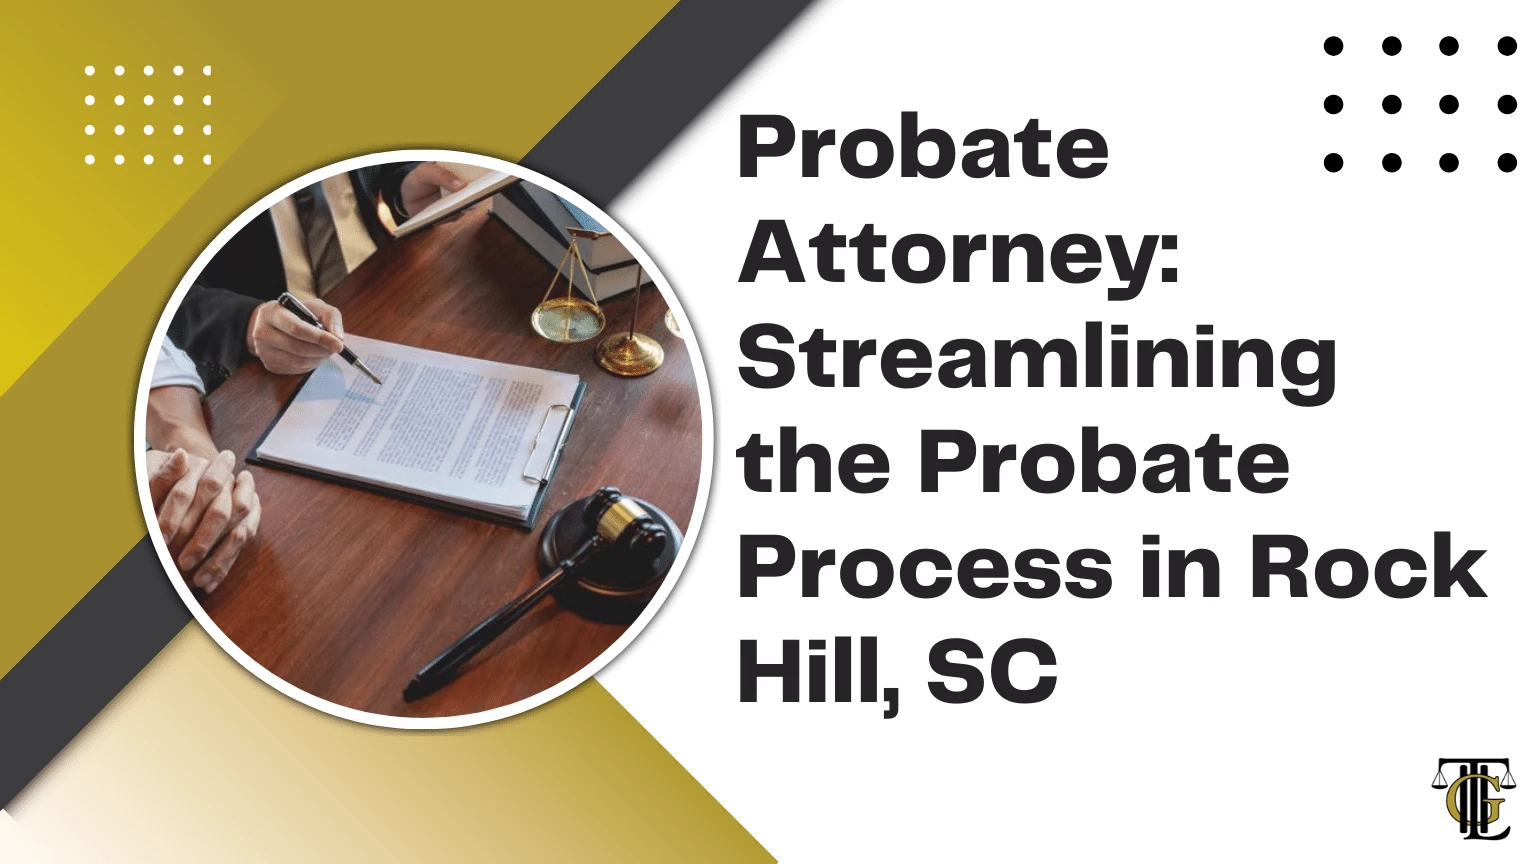 probate attorneystreamlining the probate process in rock hill, sc